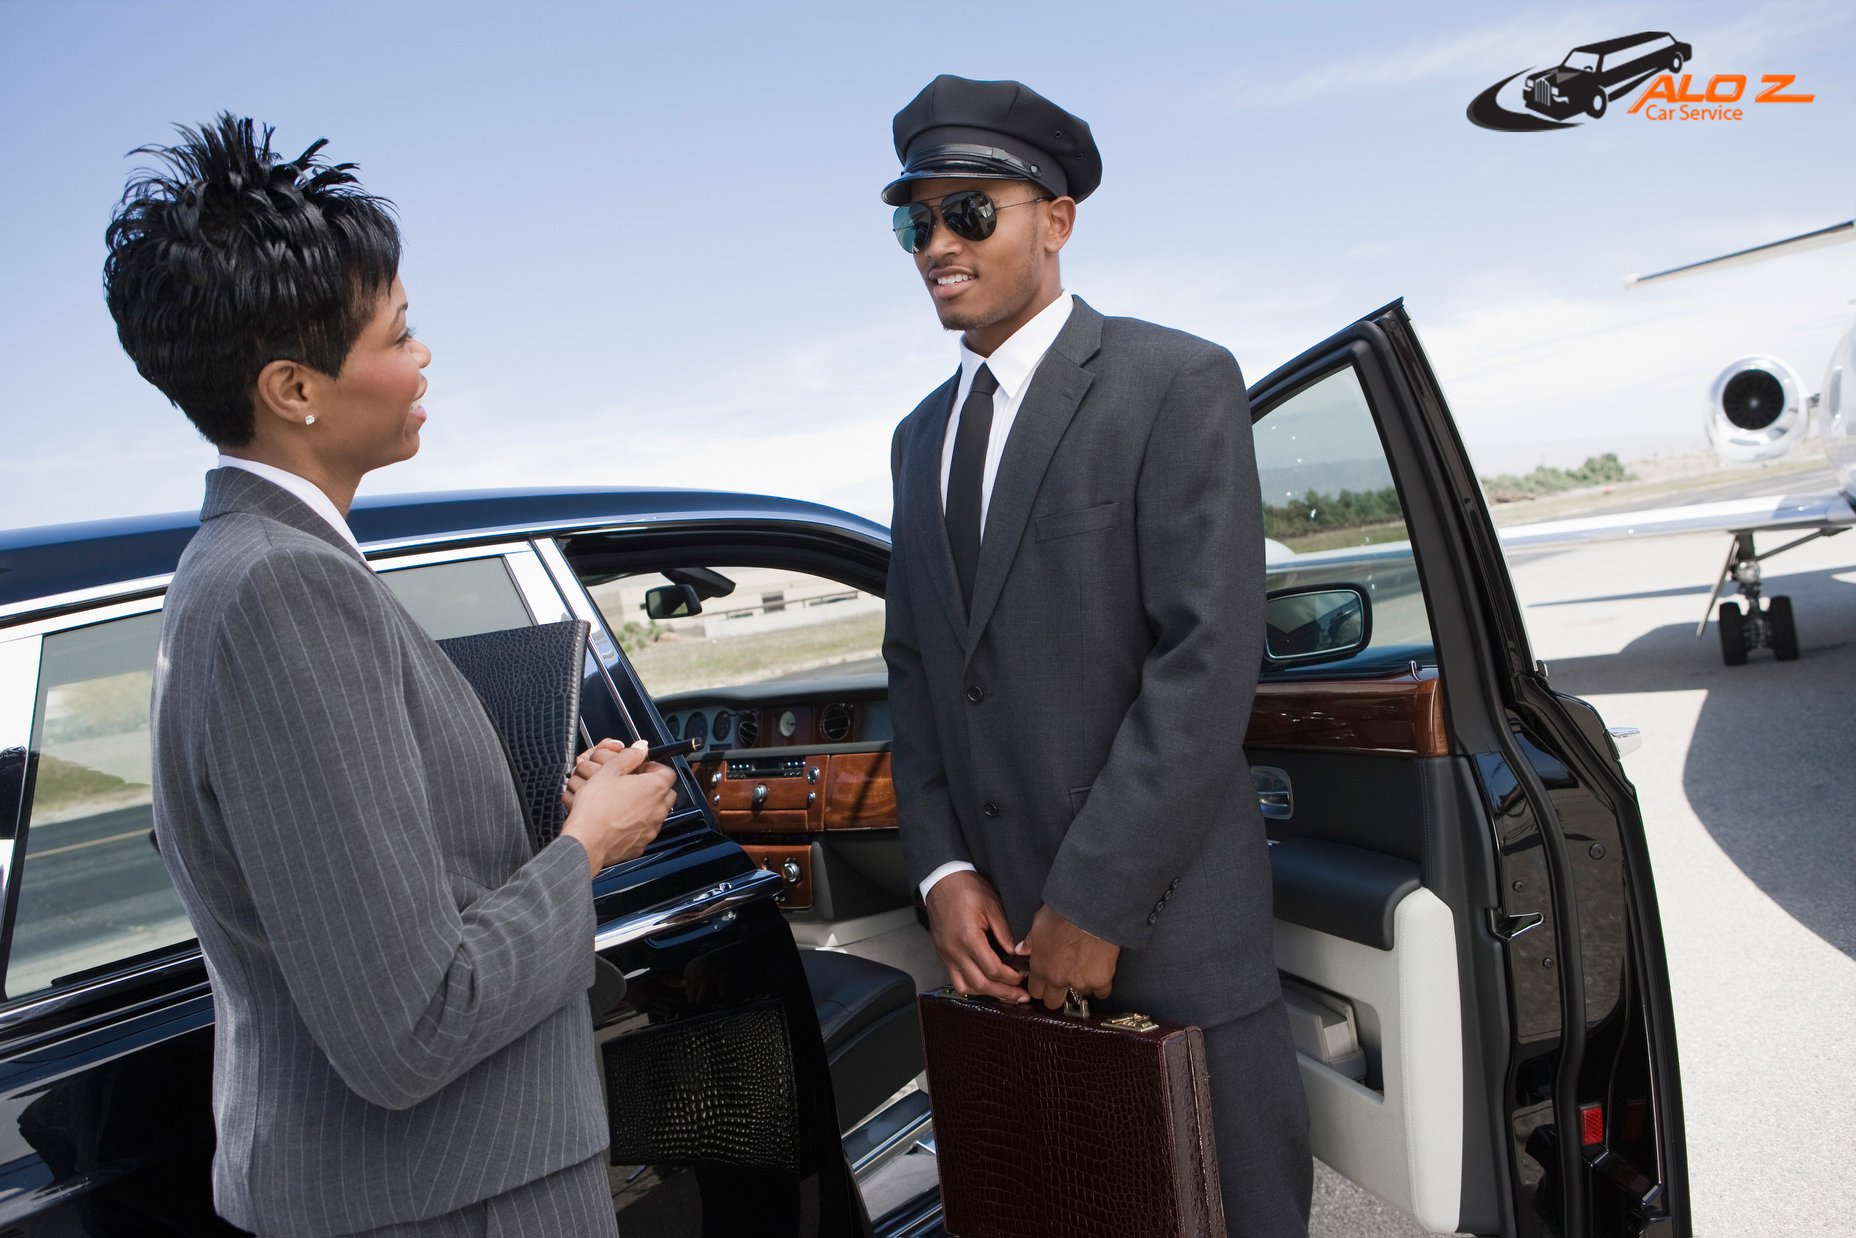 Find Airport Taxi Or Local Taxi 732-742-2252 Limo Service New Jersey